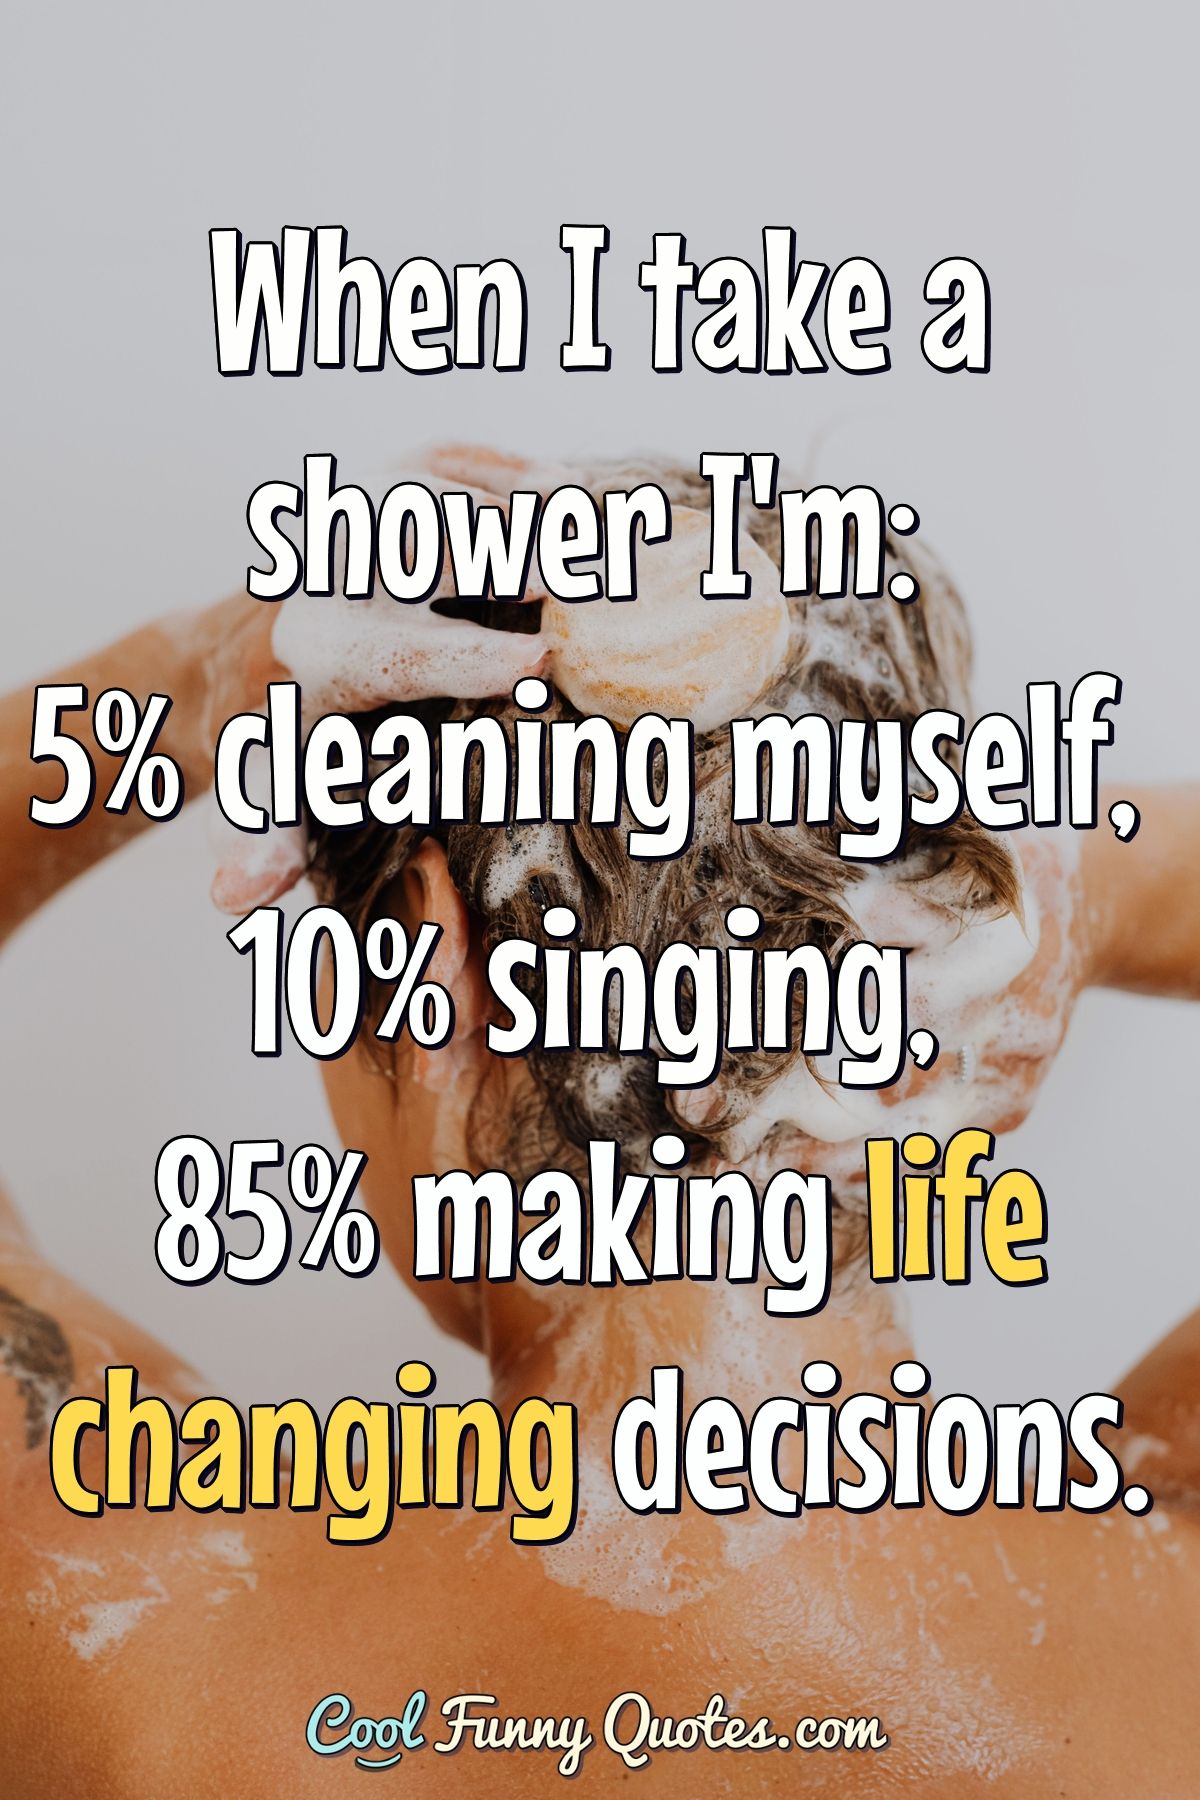 When I take a shower I'm: 5% cleaning myself, 10% singing, 85% making  life...